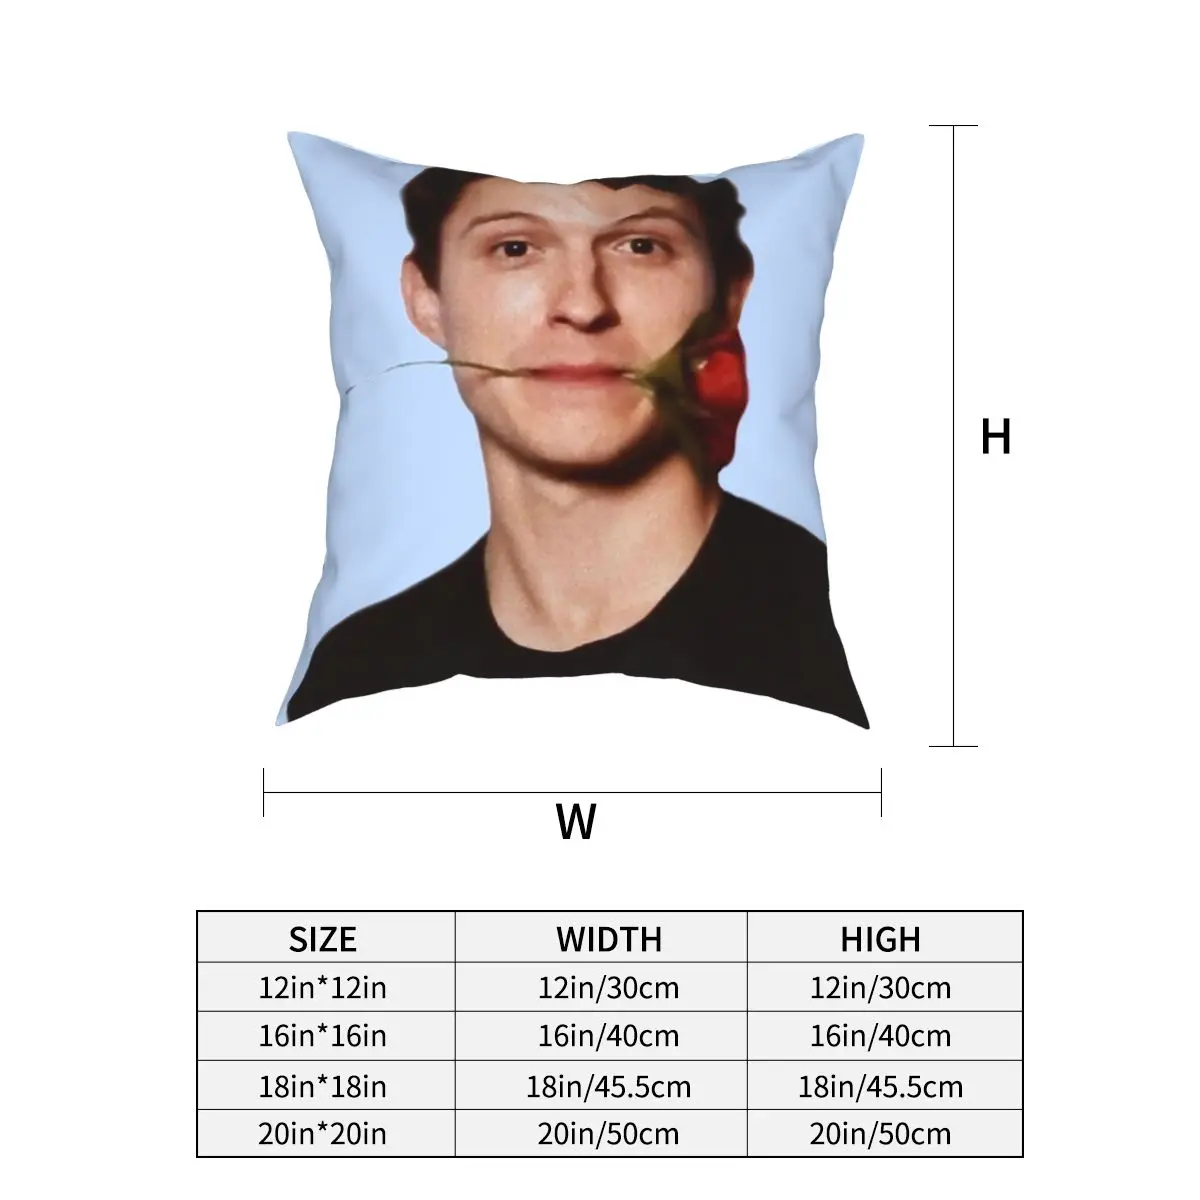 

Tom Holland Rose Flower Pillowcase Printed Polyester Cushion Cover Decorative Pillow Case Cover Home Zippered 45*45cm